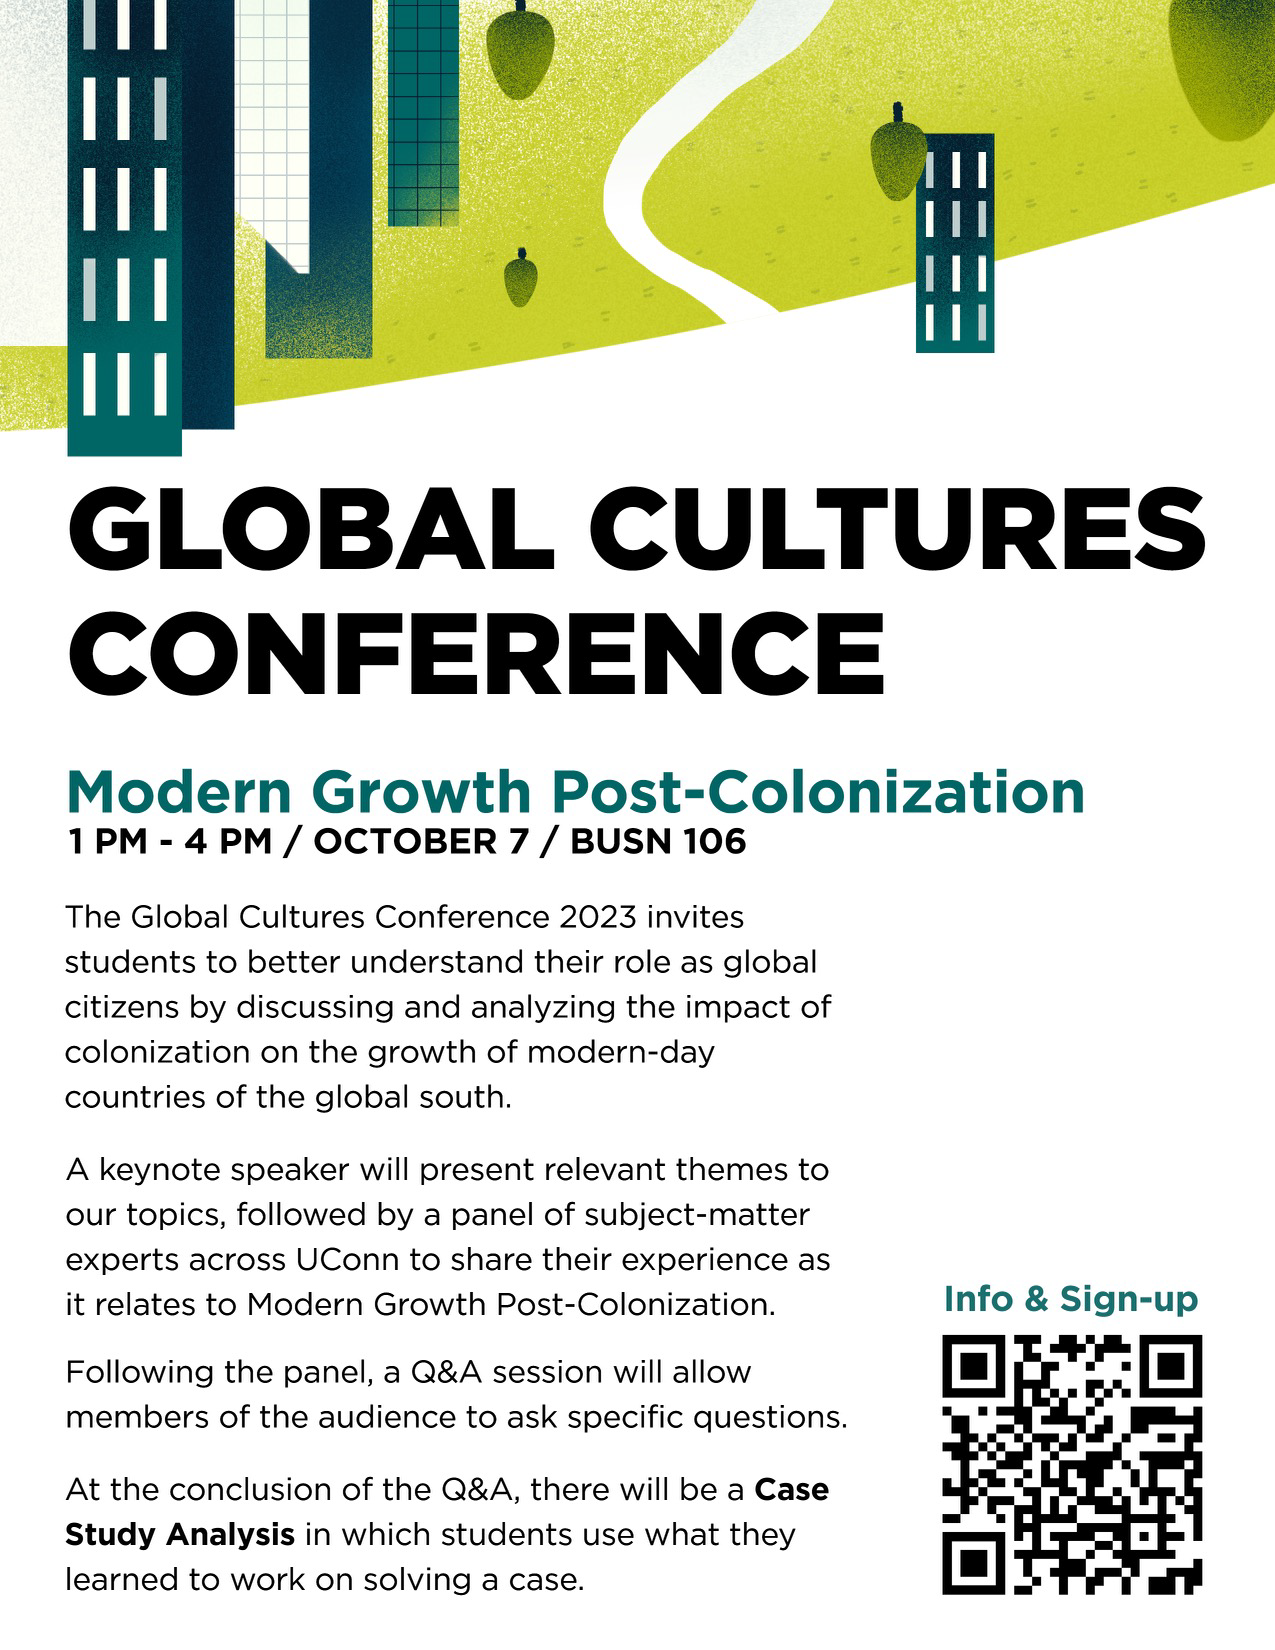 Global Cultures Conference